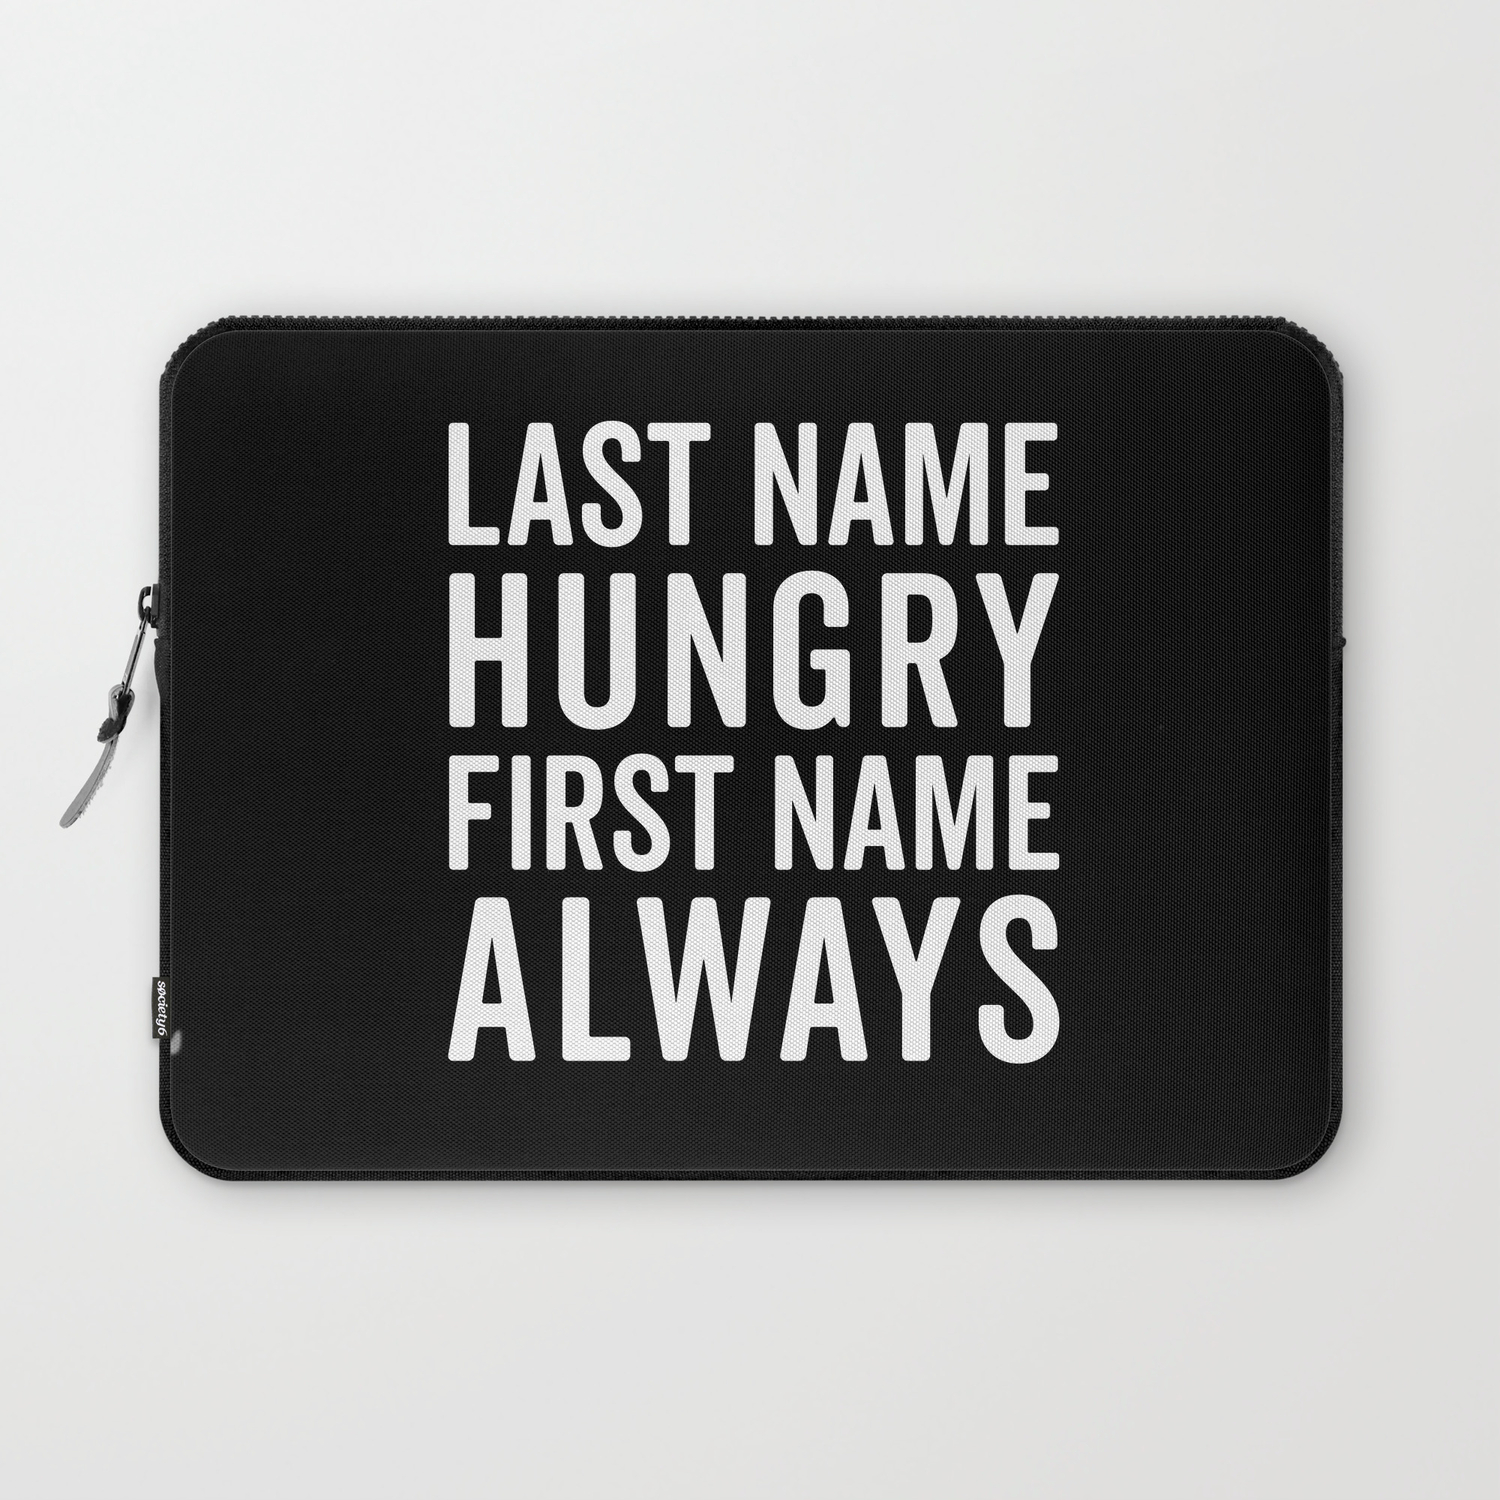 Last Name Hungry Funny Quote Laptop Sleeve by EnvyArt | Society6